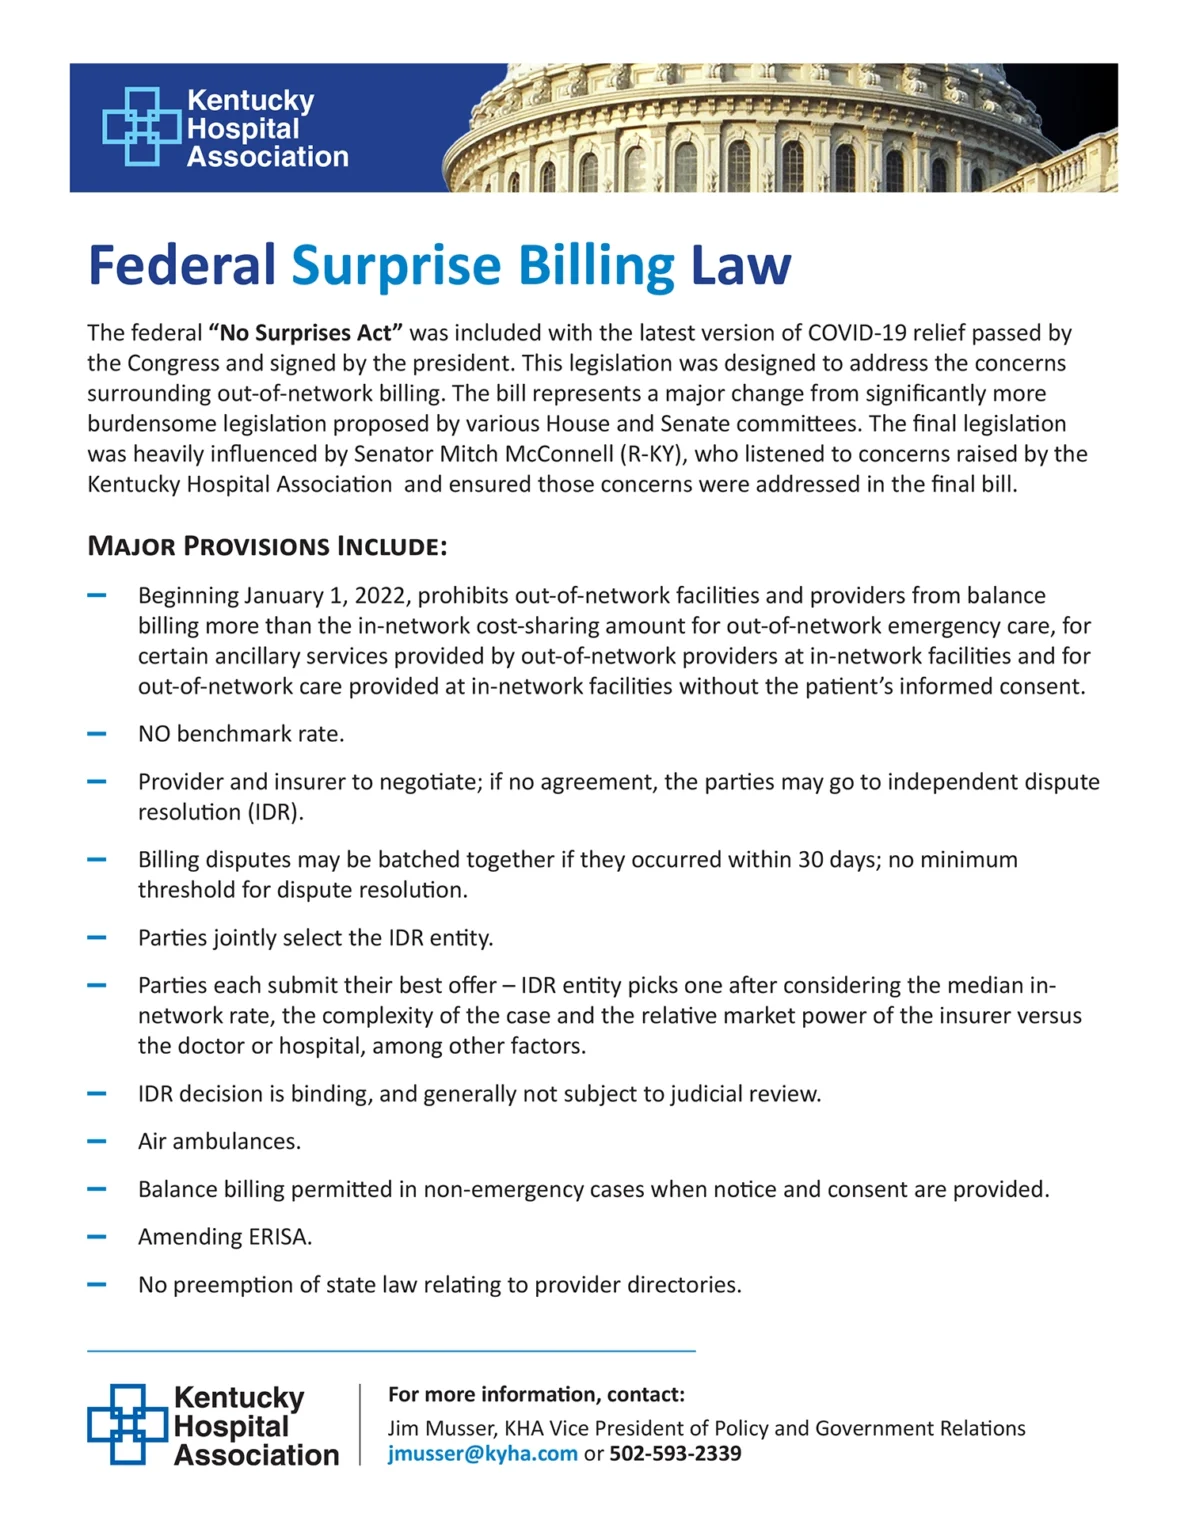 Federal Surprise Billing Law one-sheet